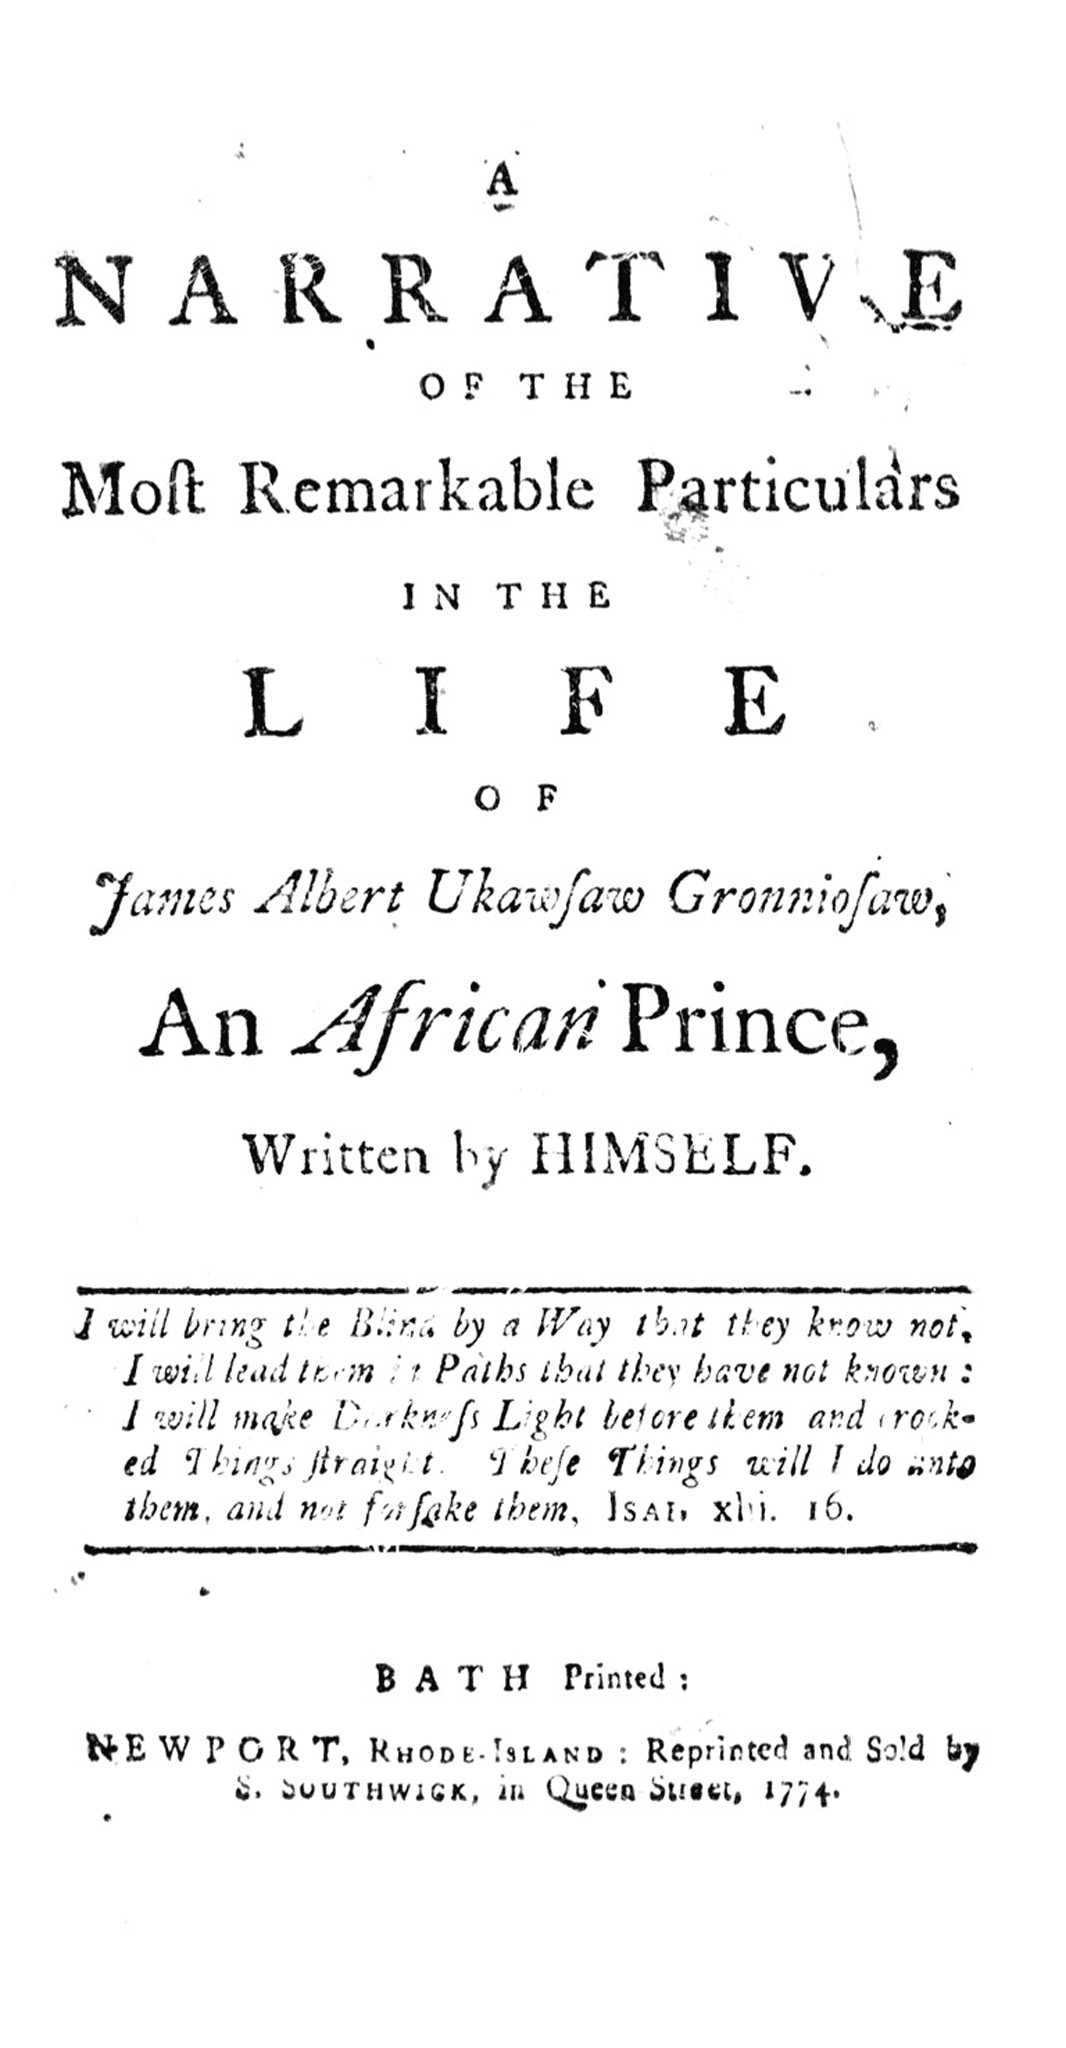 Image of cover page of autobiography